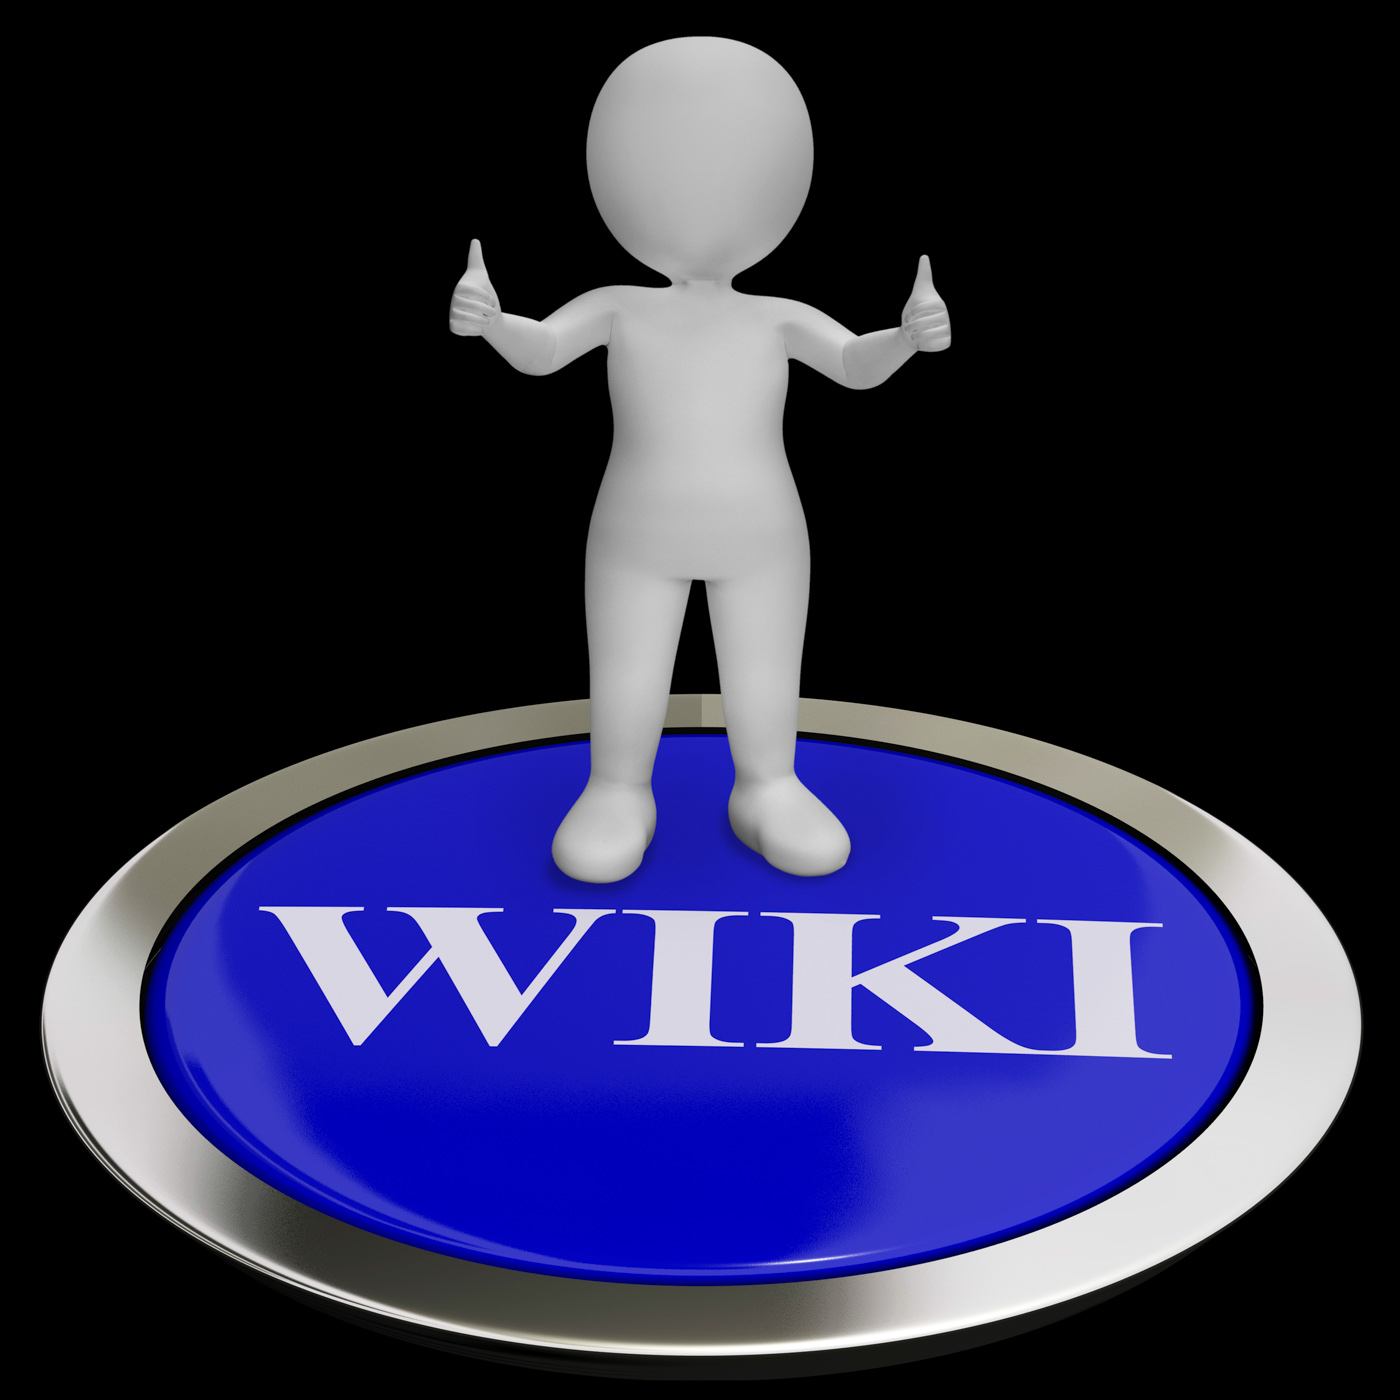 Wiki button shows online information or encyclopedia photo